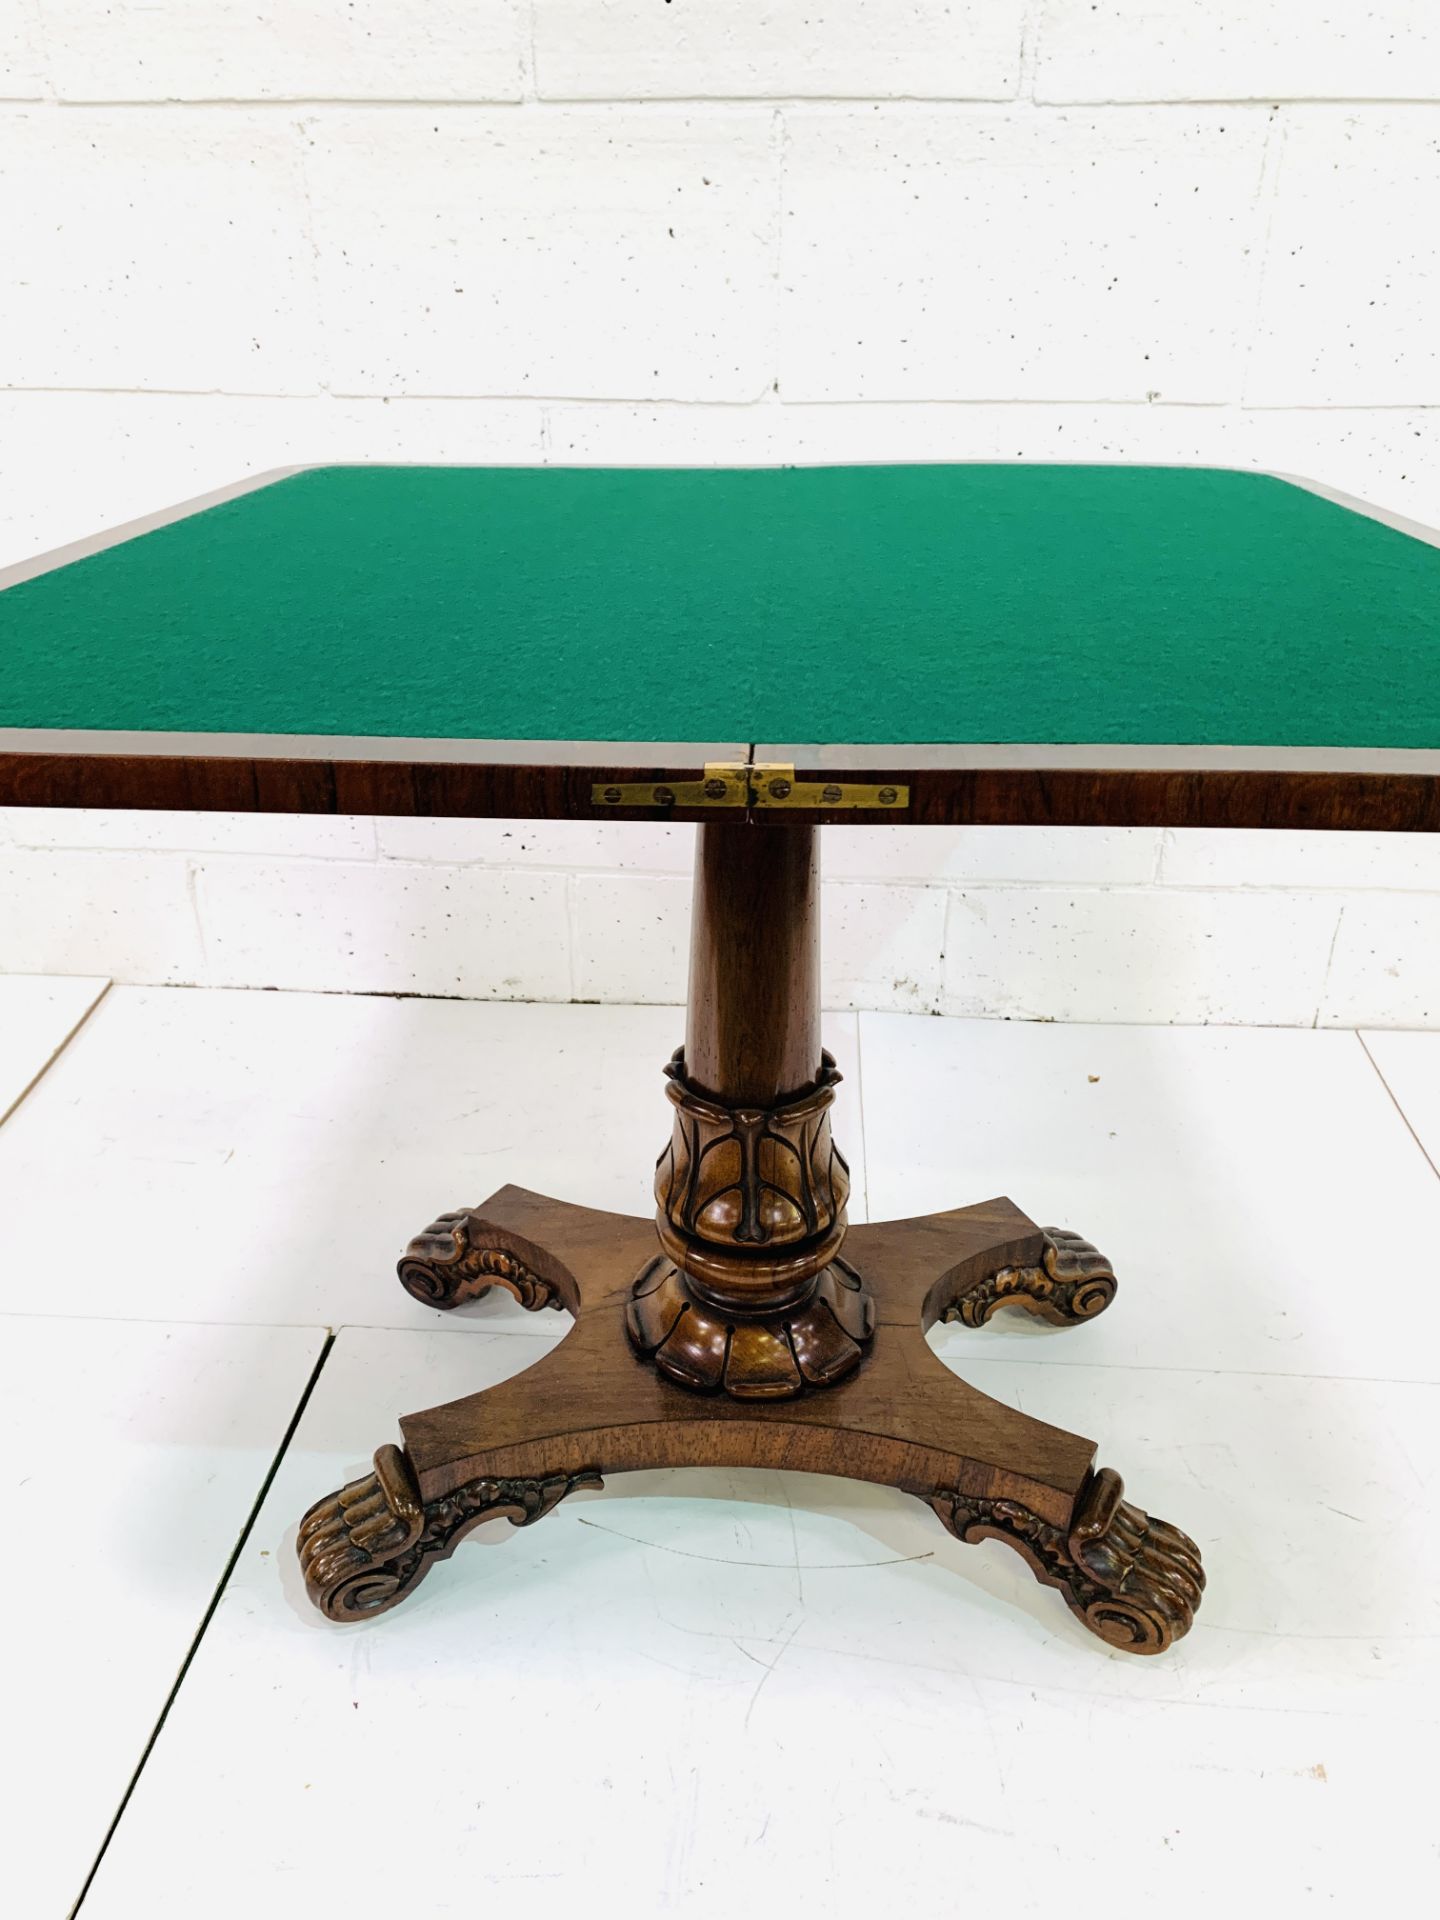 Burr mahogany swivel fold-over top games table - Image 4 of 7